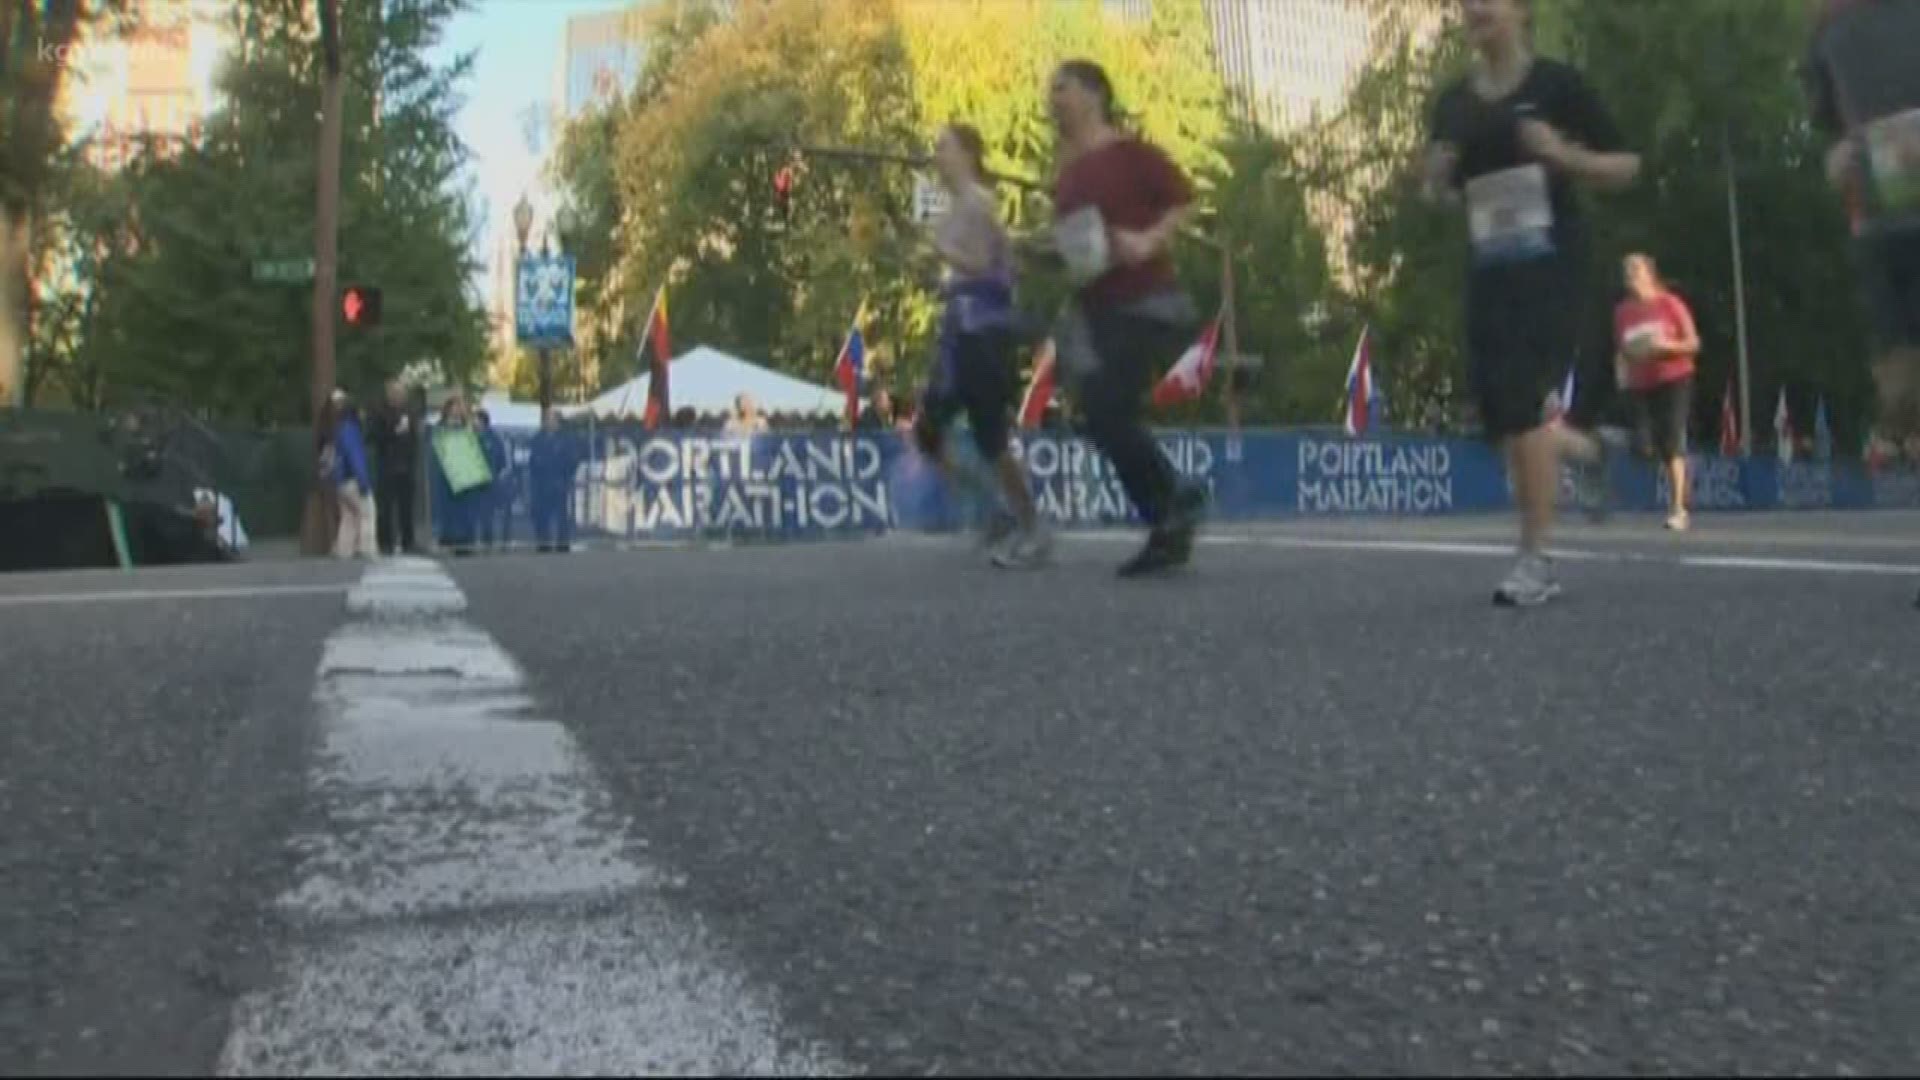 The nonprofit that ran the marathon for 47 years has folded amid controversy.